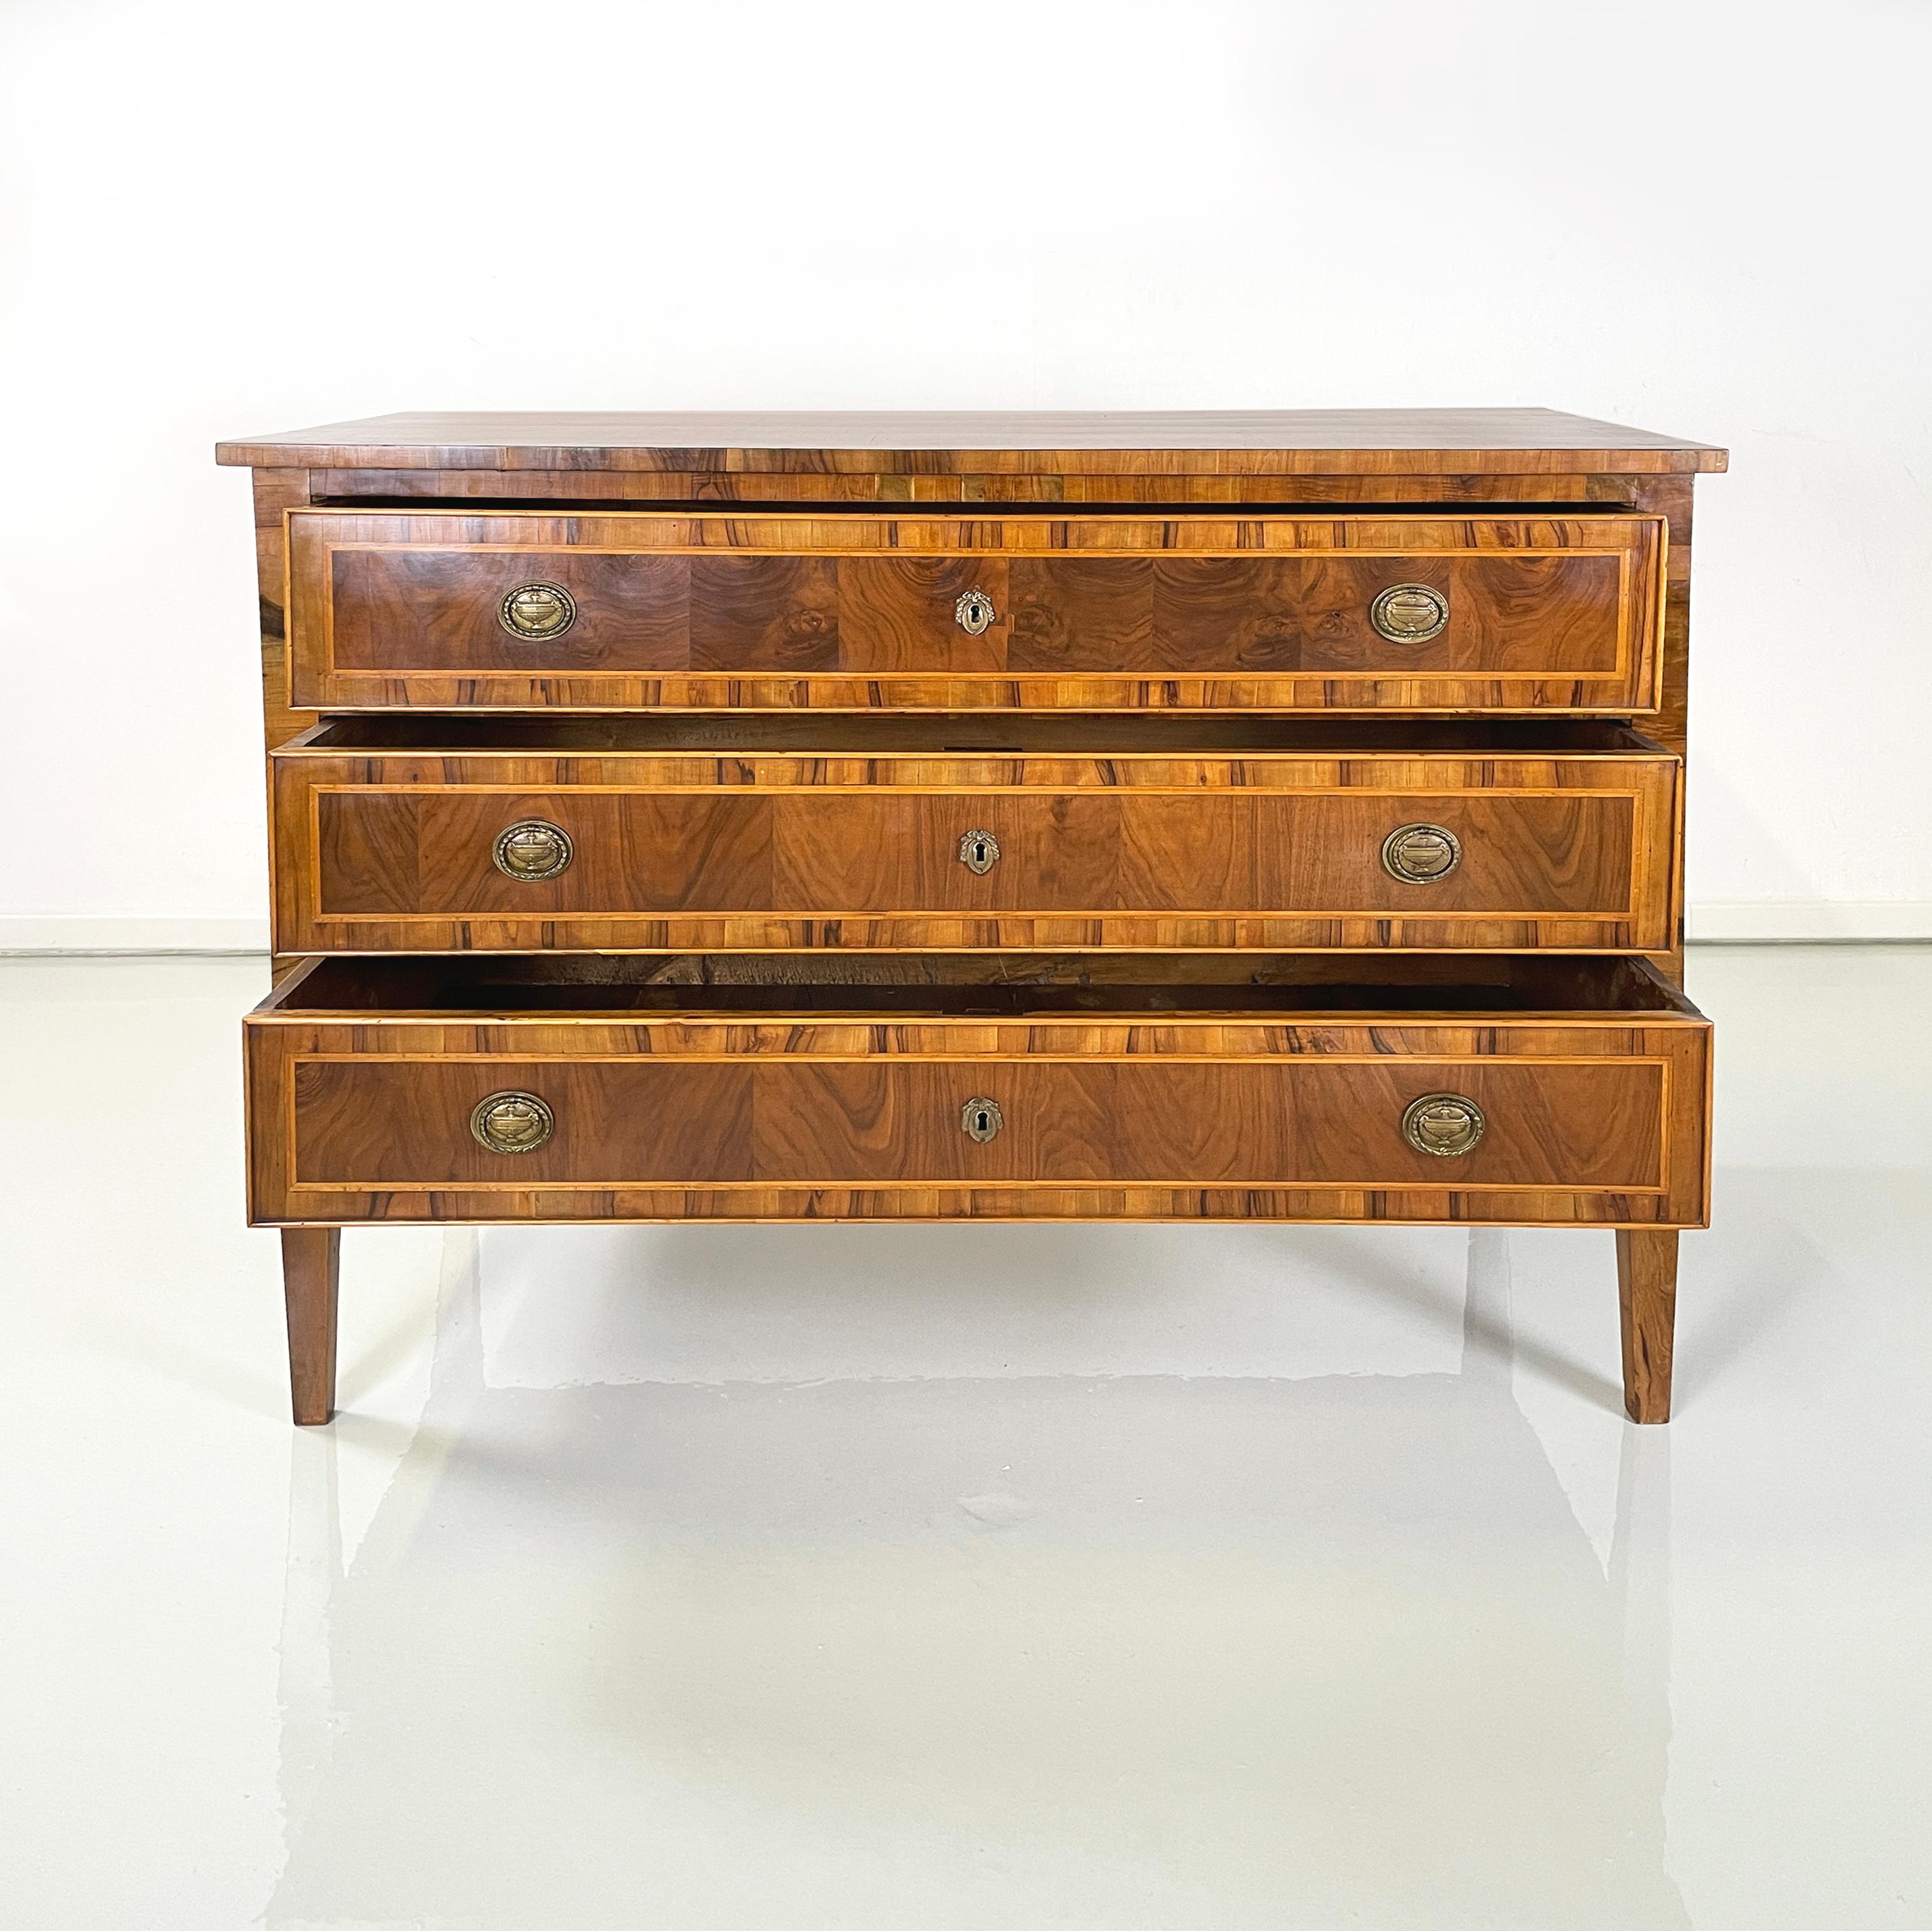 Italian antique Directory style Chest of drawers in solid wood, mid 1700s
Chest of drawers with rectangular top in solid wood of different shades. On the front it has 3 drawers, all equipped with a patch and two round brass handles, finely worked